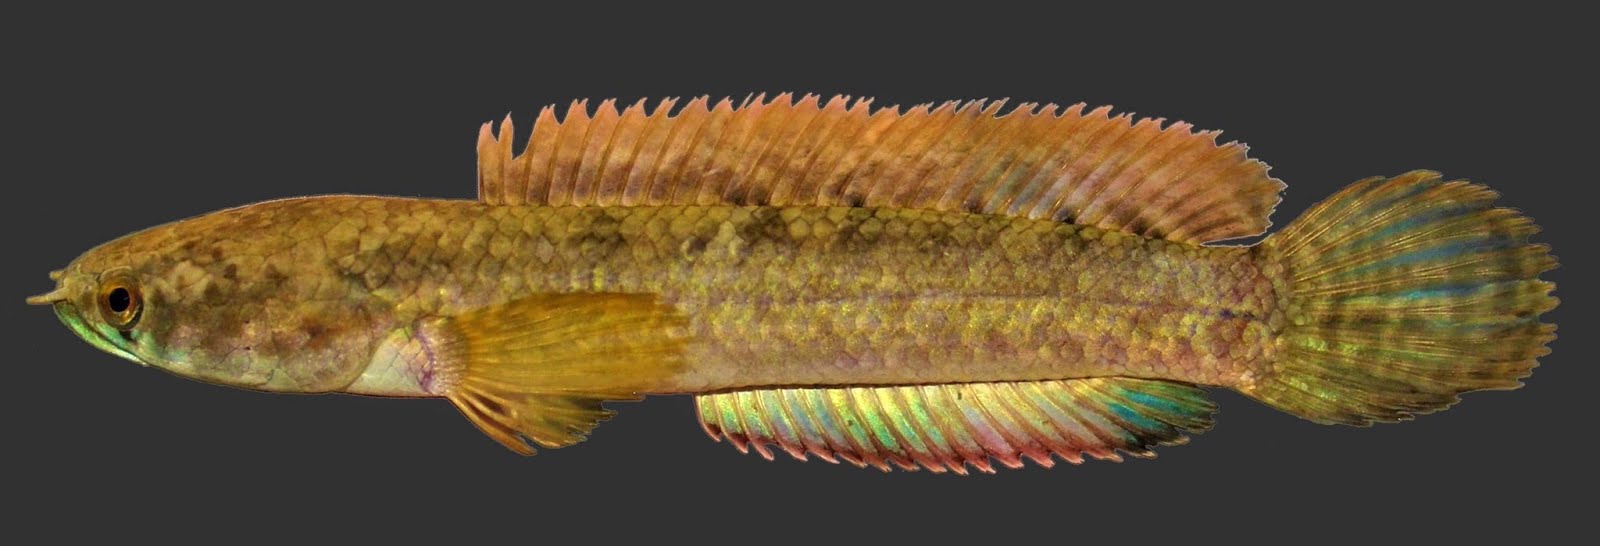 holotype, ZSI FF 7660, 89.5 mm SL, prior to preservation